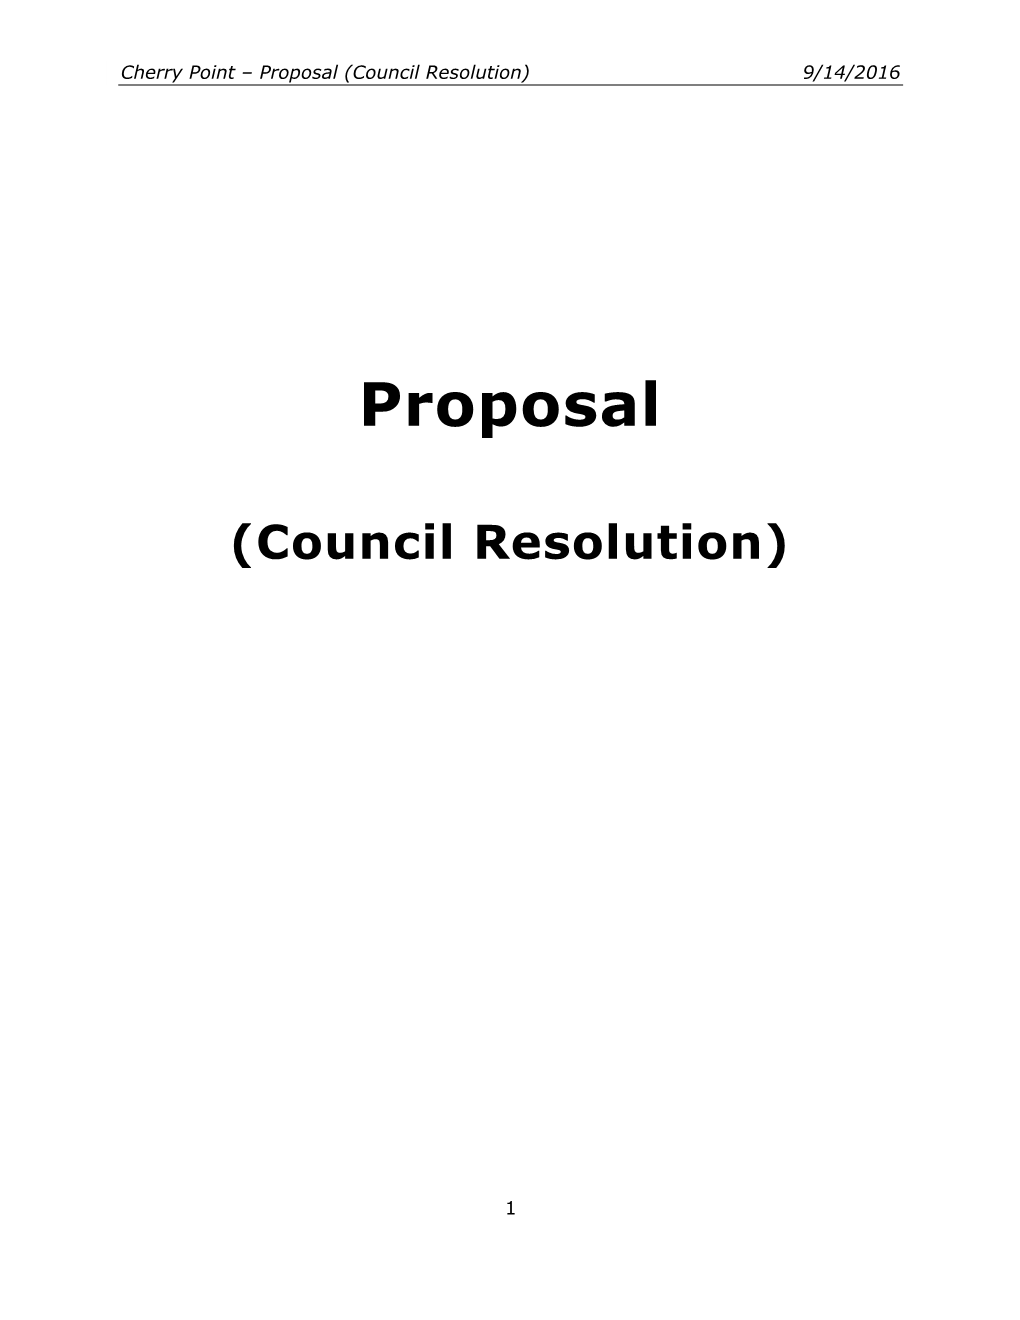 Proposal (Council Resolution) 9/14/2016